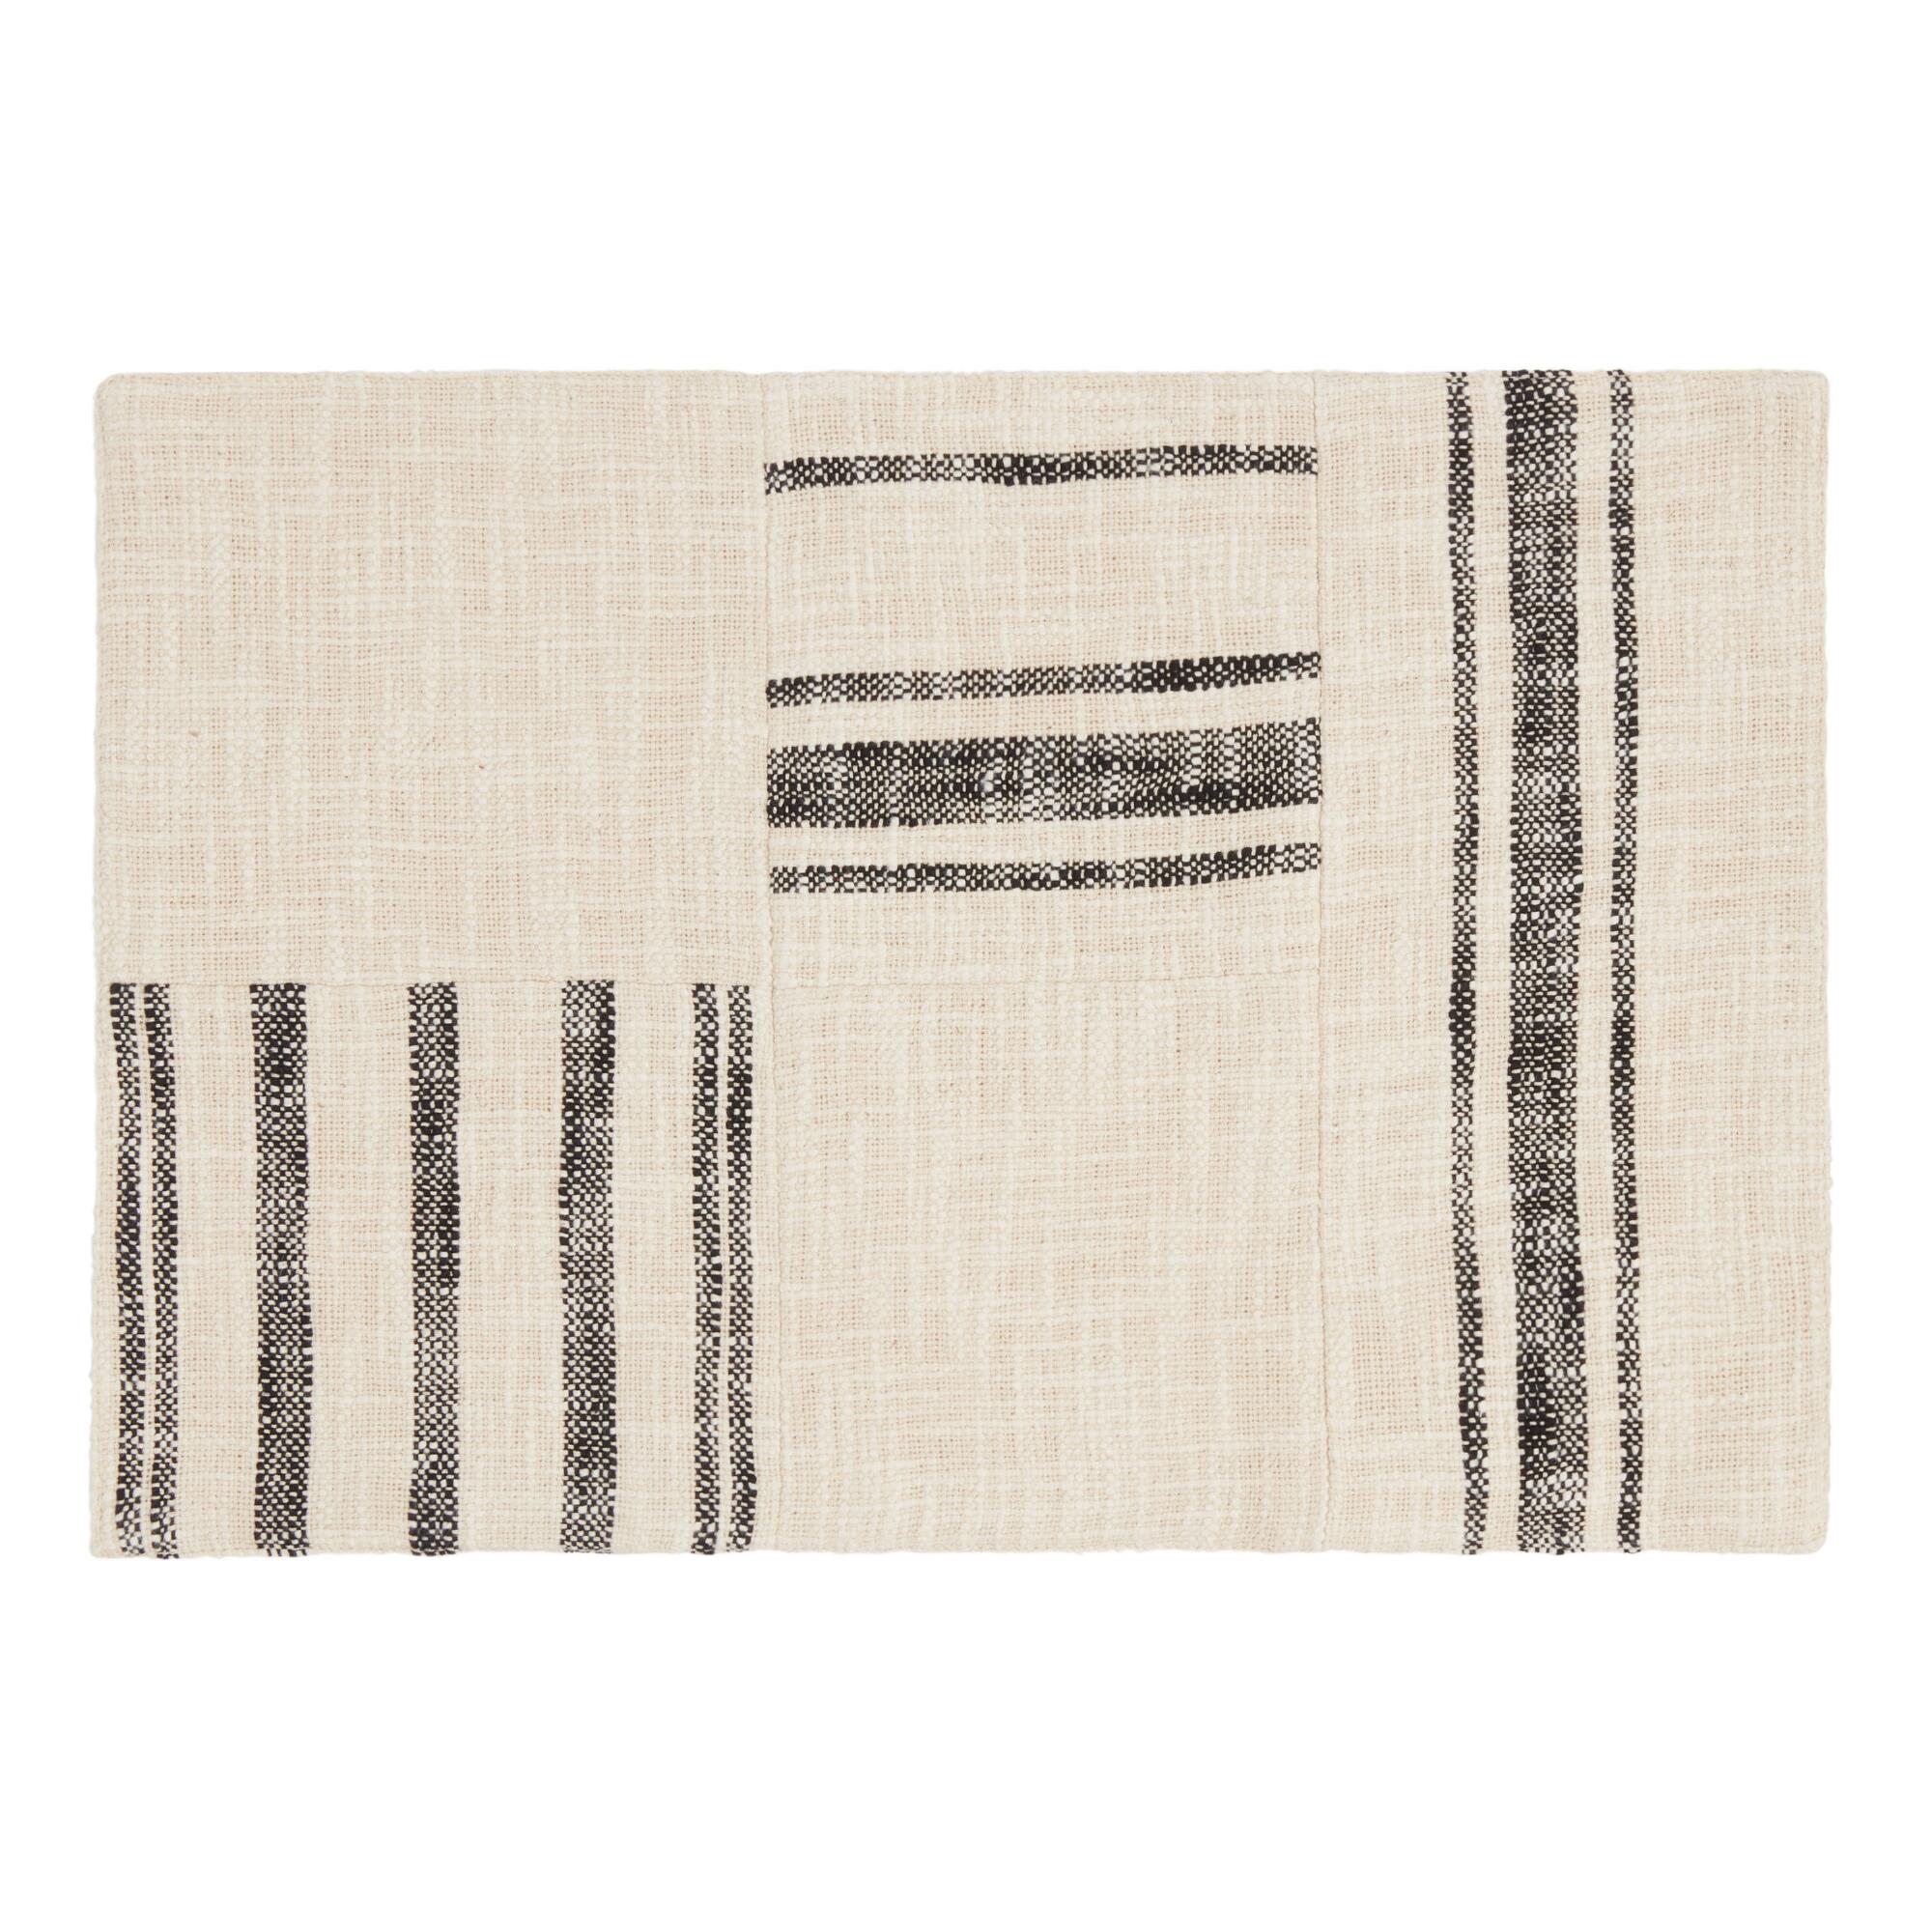 Ivory and Black Rustic Stripe Patch Placemats Set of 4: Natural - Cotton by World Market